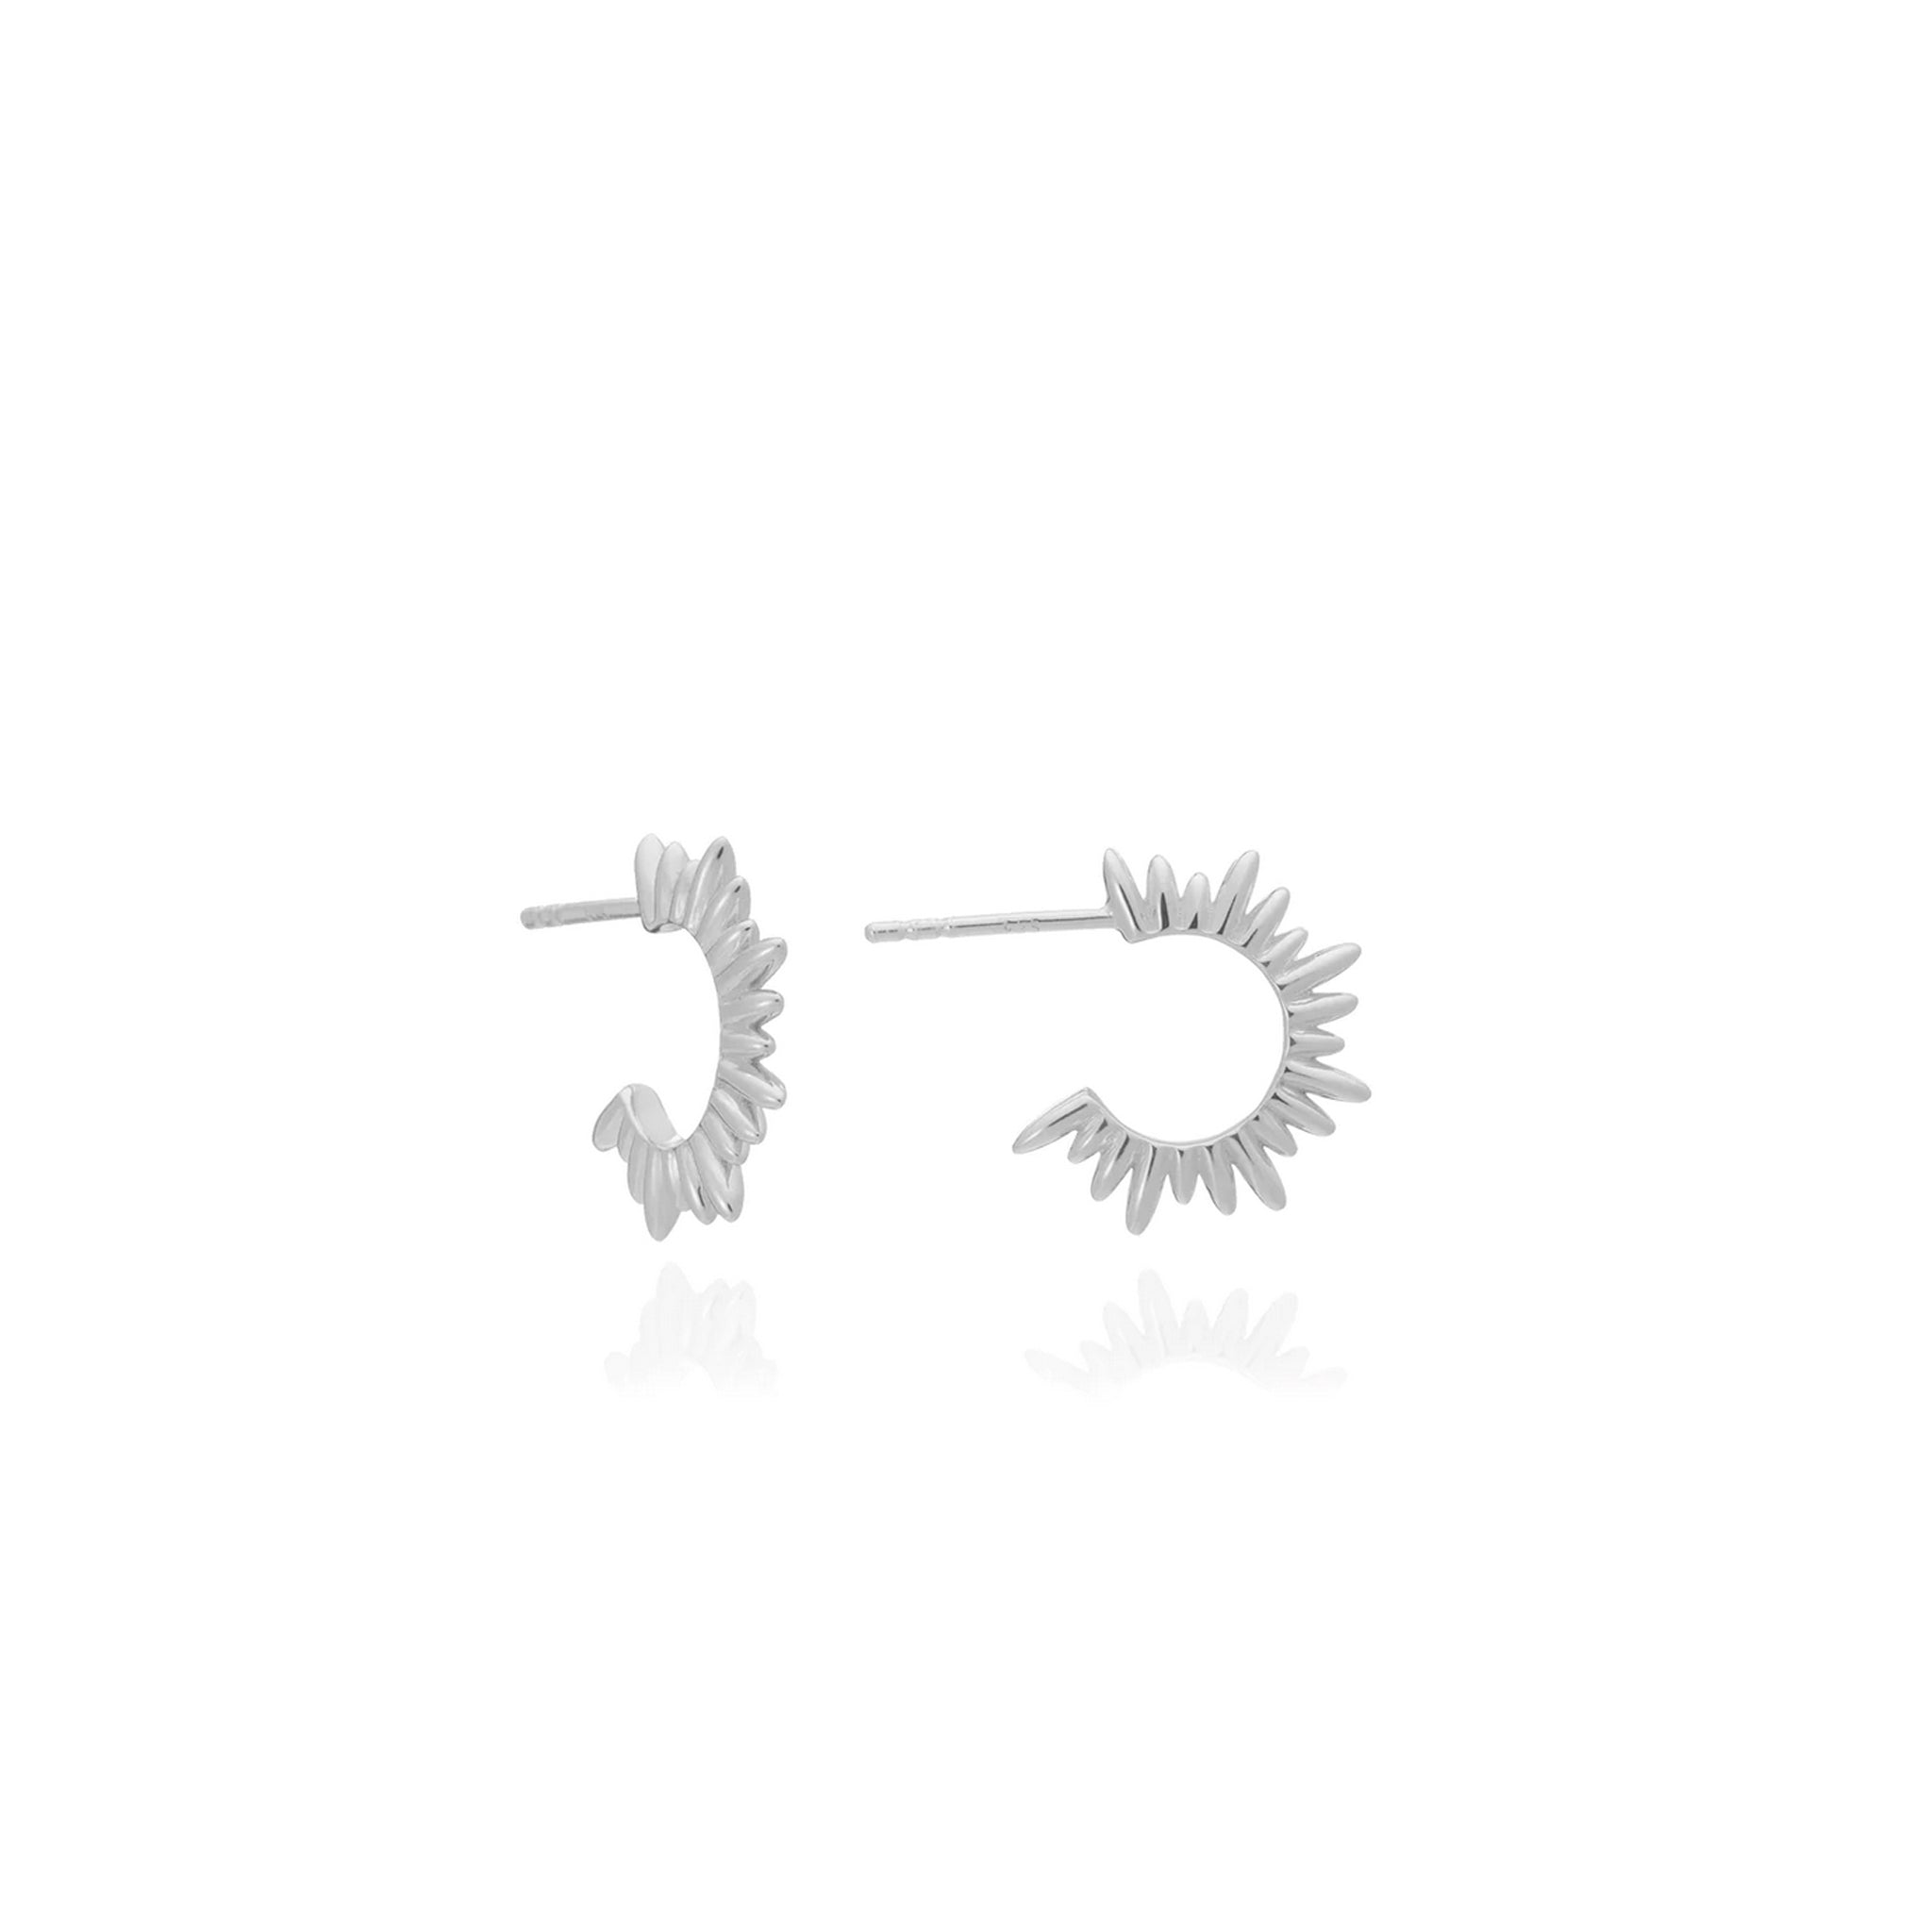 A pair of Electric Goddess Mini Hoop Earrings - Silver from Rachel Jackson with an Art Deco twist on a white background.